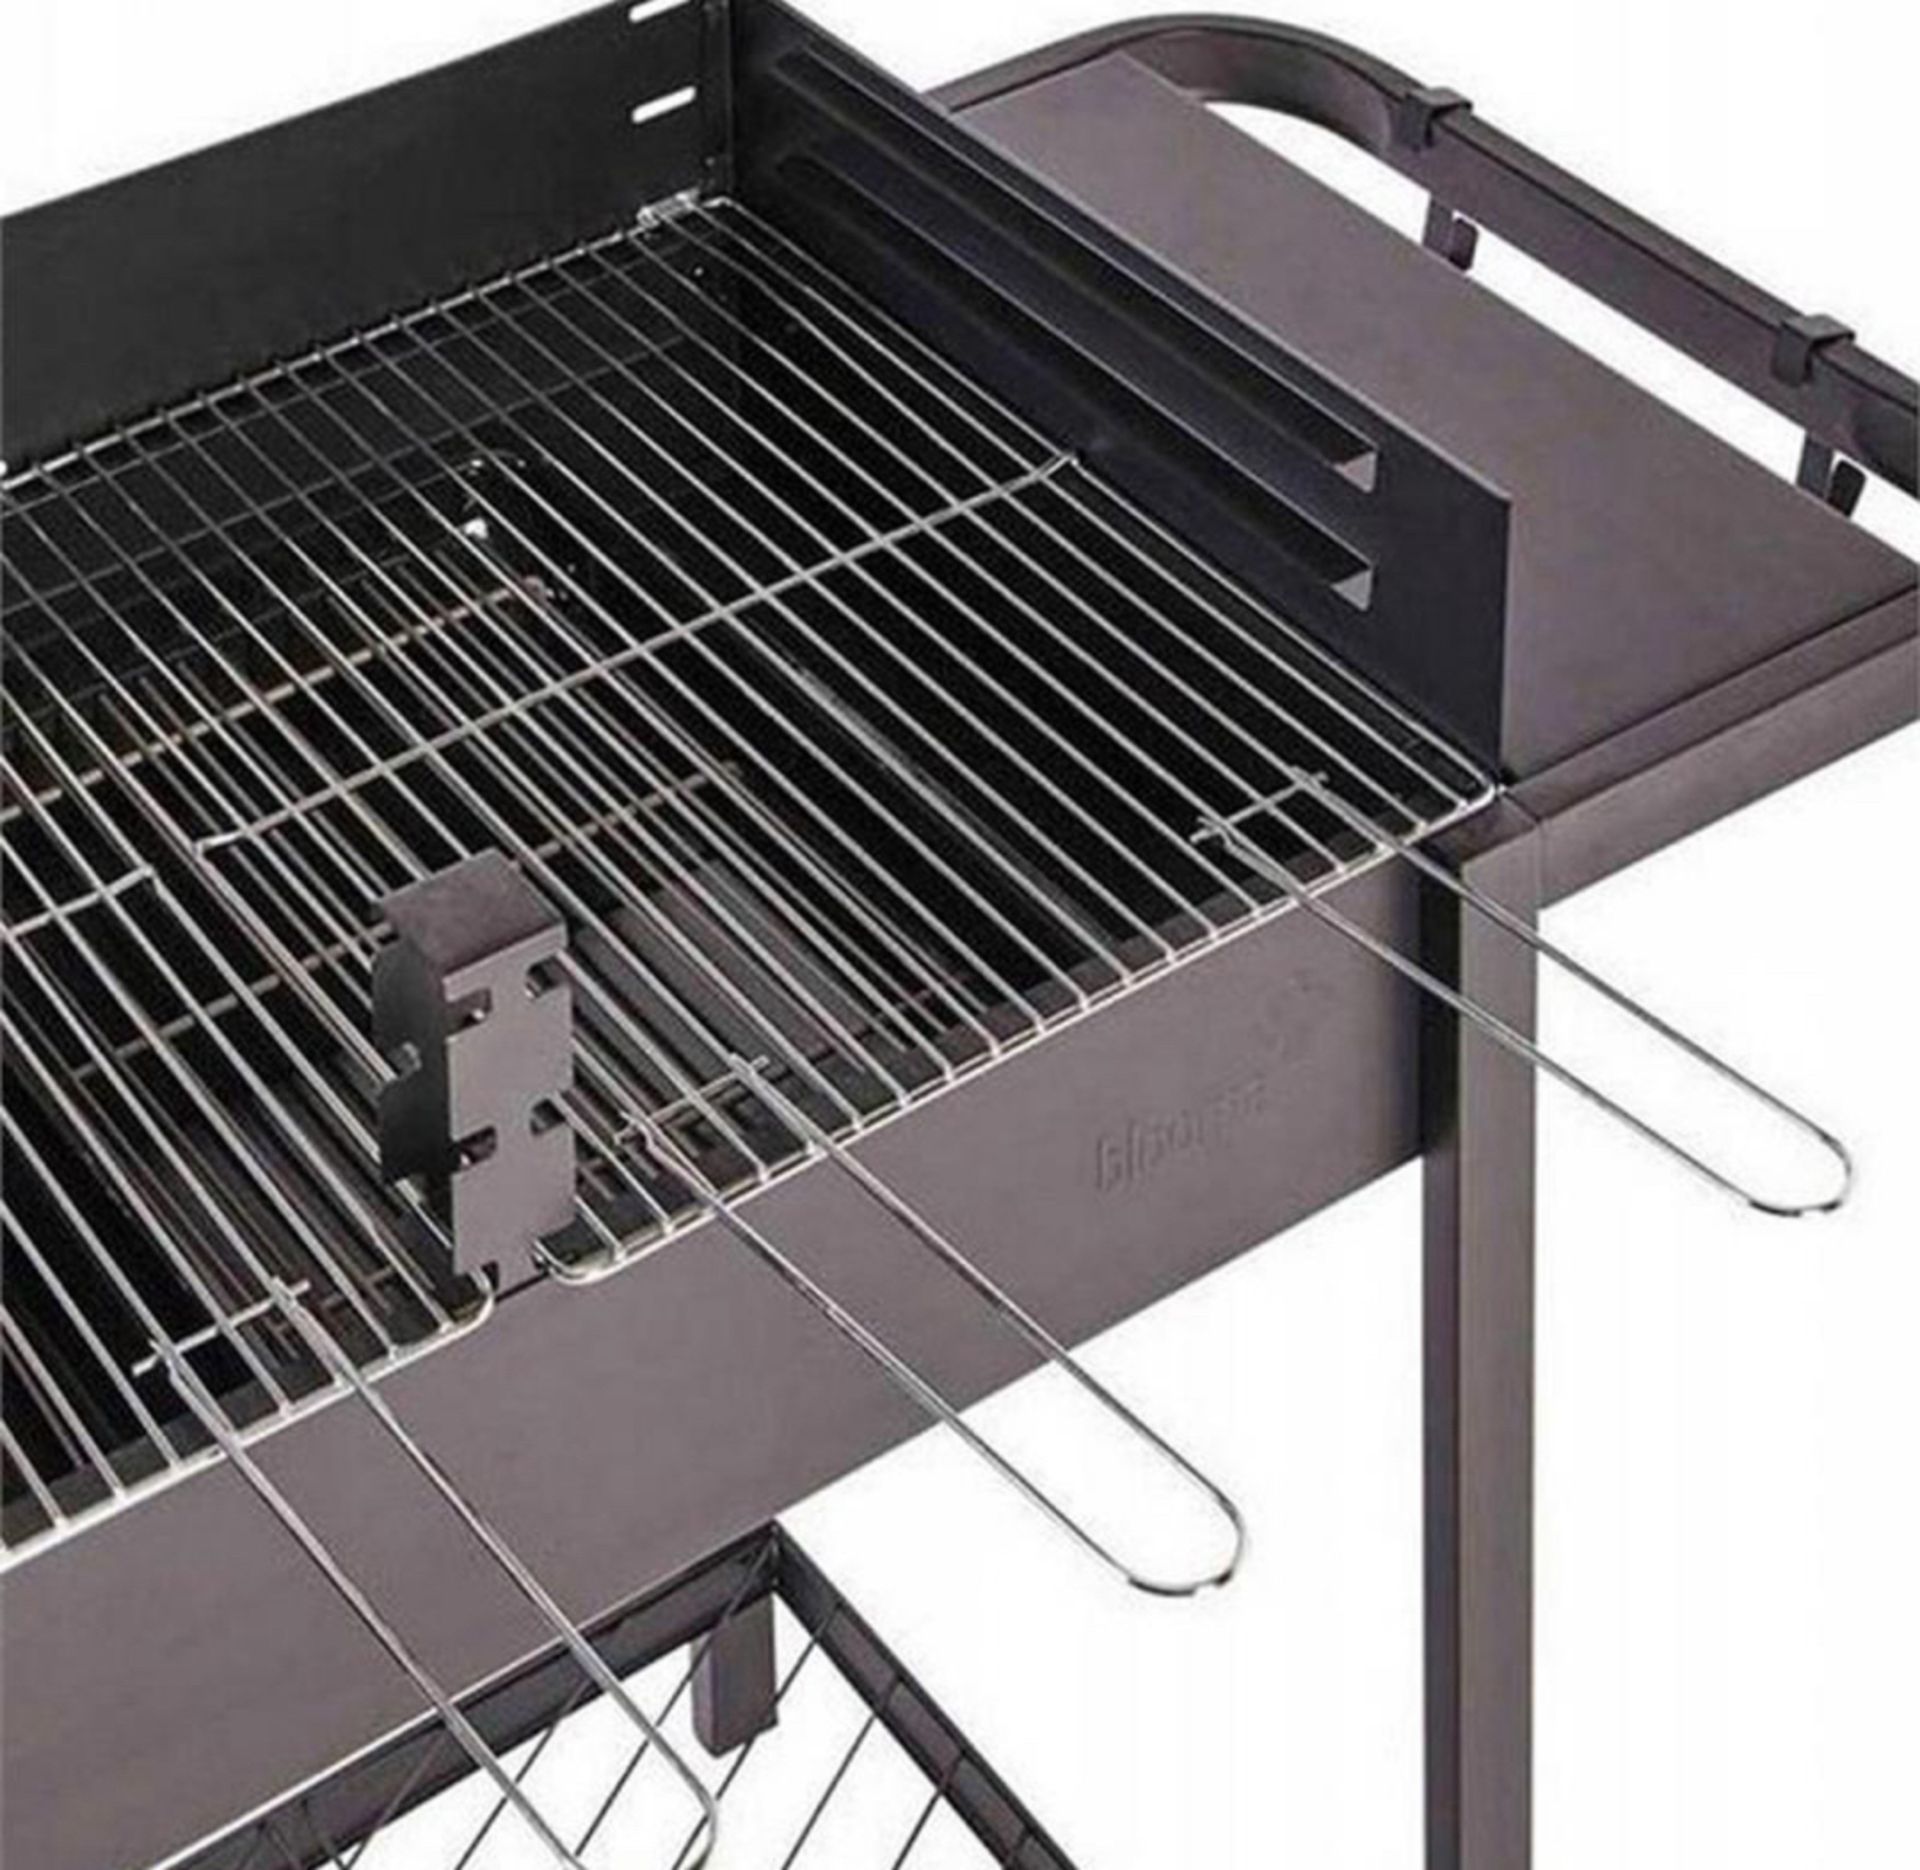 Zelfo BBQ Barbecue Grill with Stands - Brand New & Boxed - Image 5 of 7